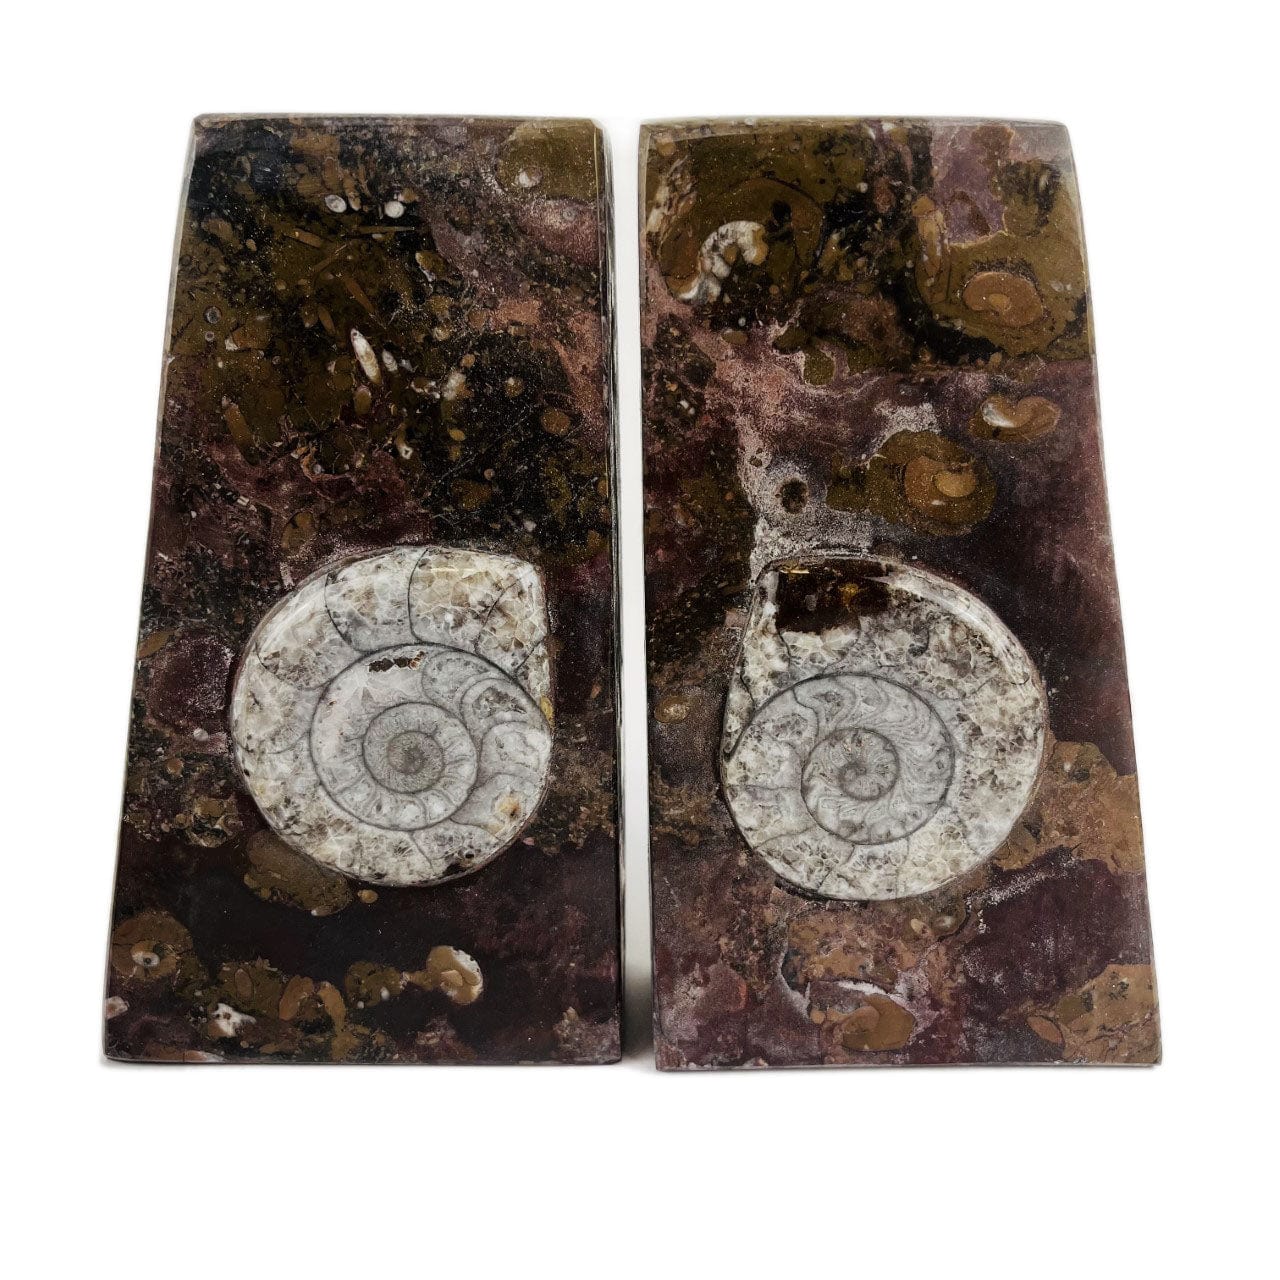 Ammonite Fossil Bookends up close , brown stone with the squared edges